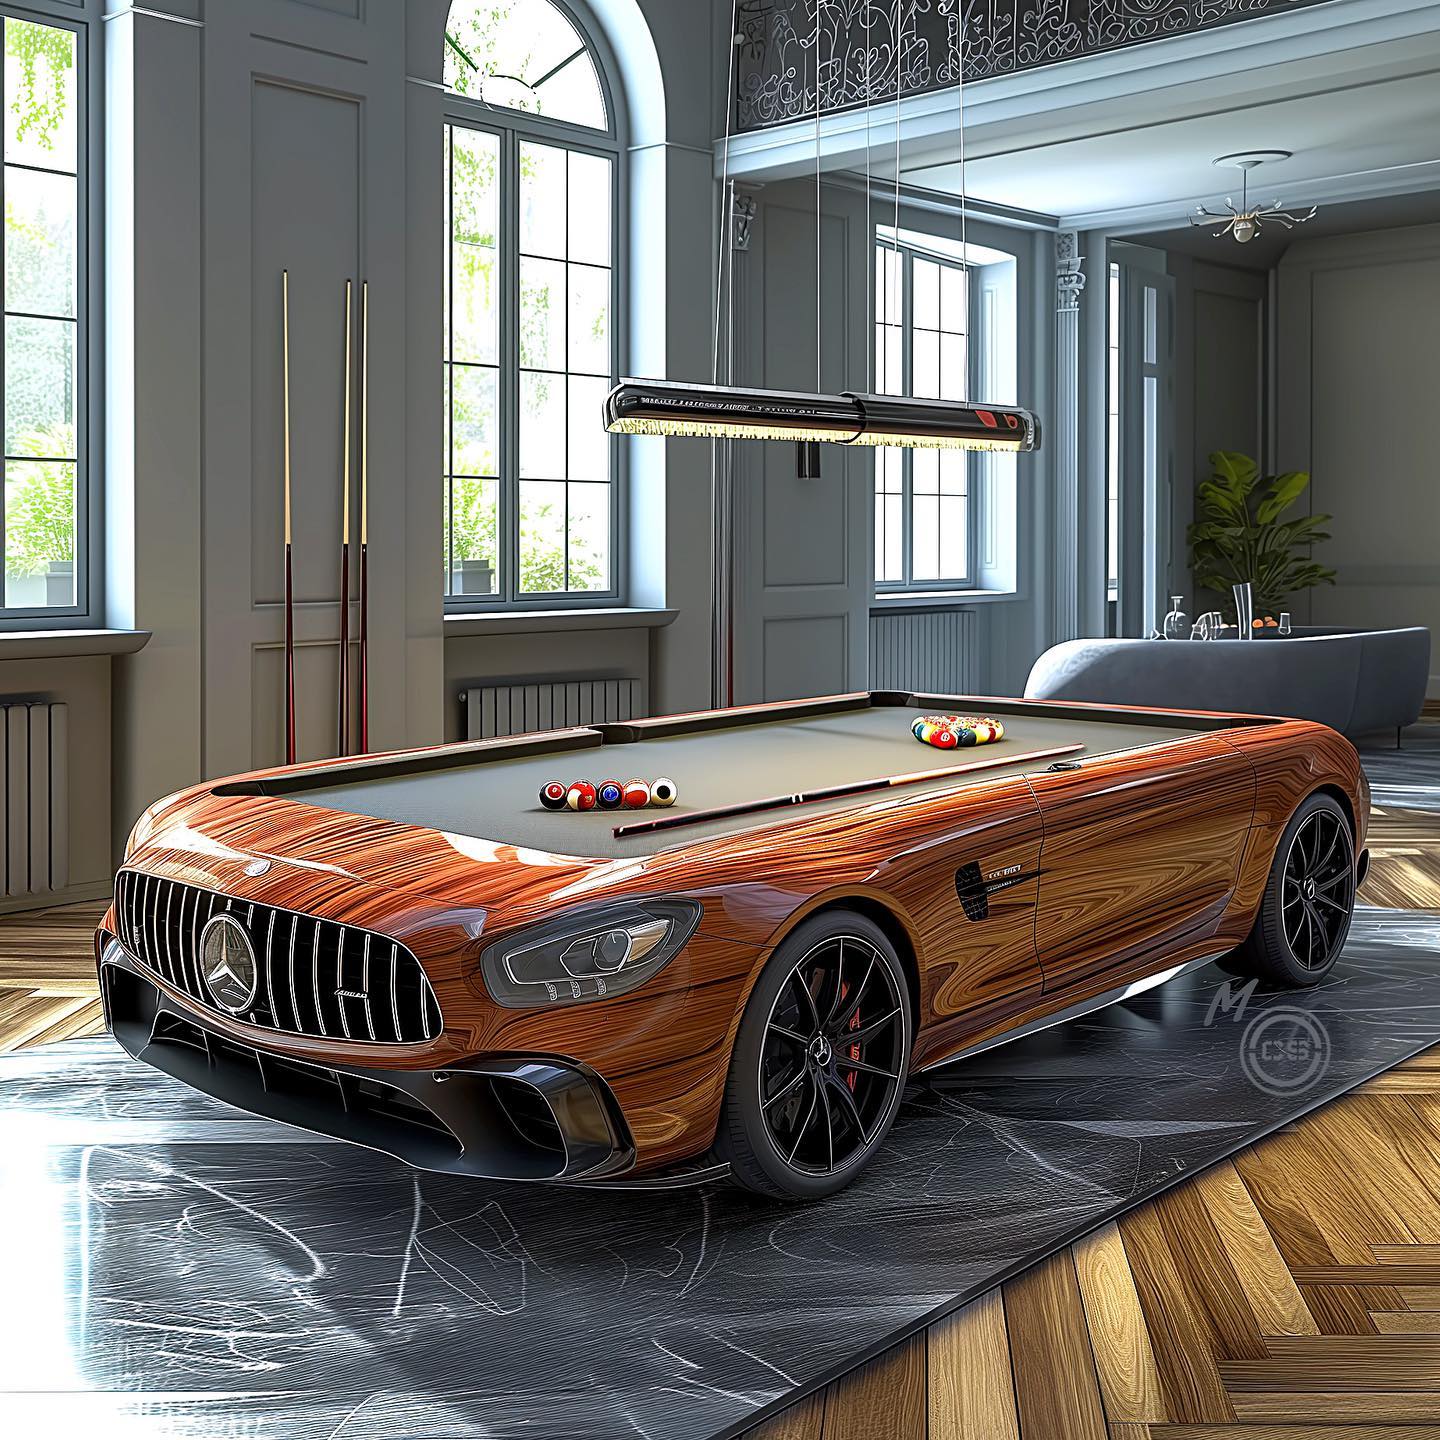 Comparison to Other Car-Inspired Pool Tables on the Market